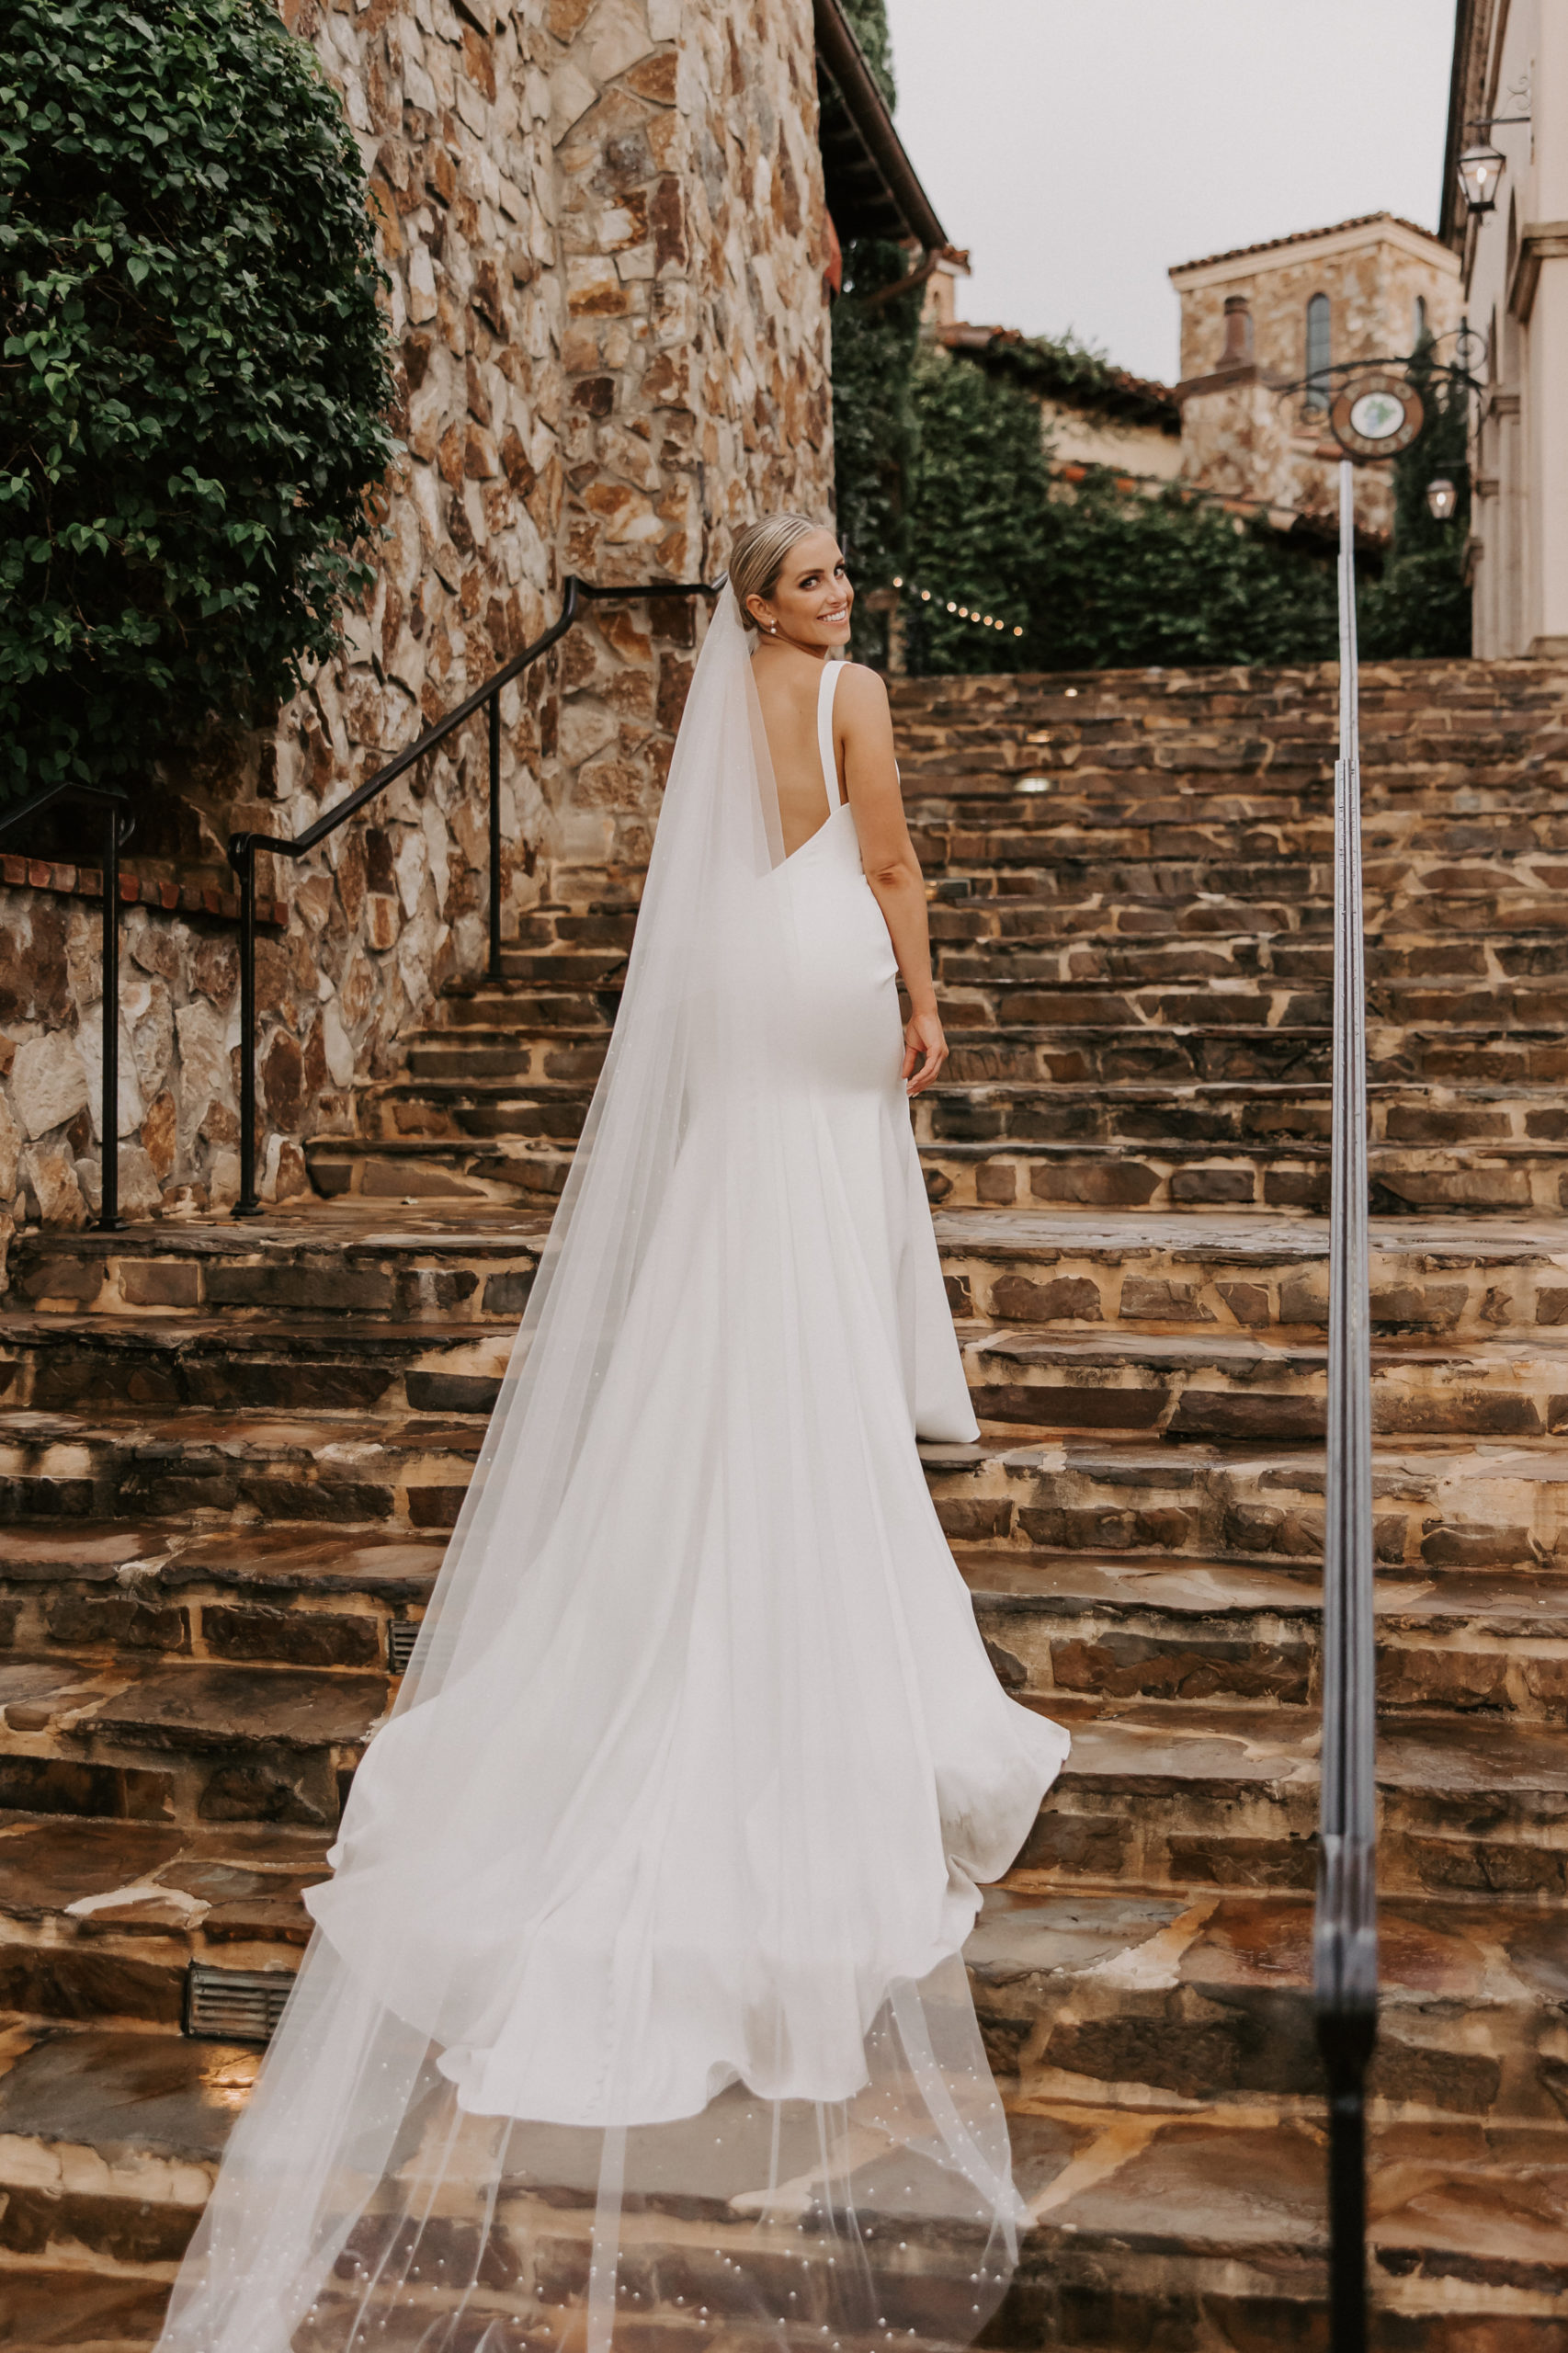 Bella Colina provide a beautiful setting surrounding yourself with the spirit of Tuscany for your elegant and timeless wedding.